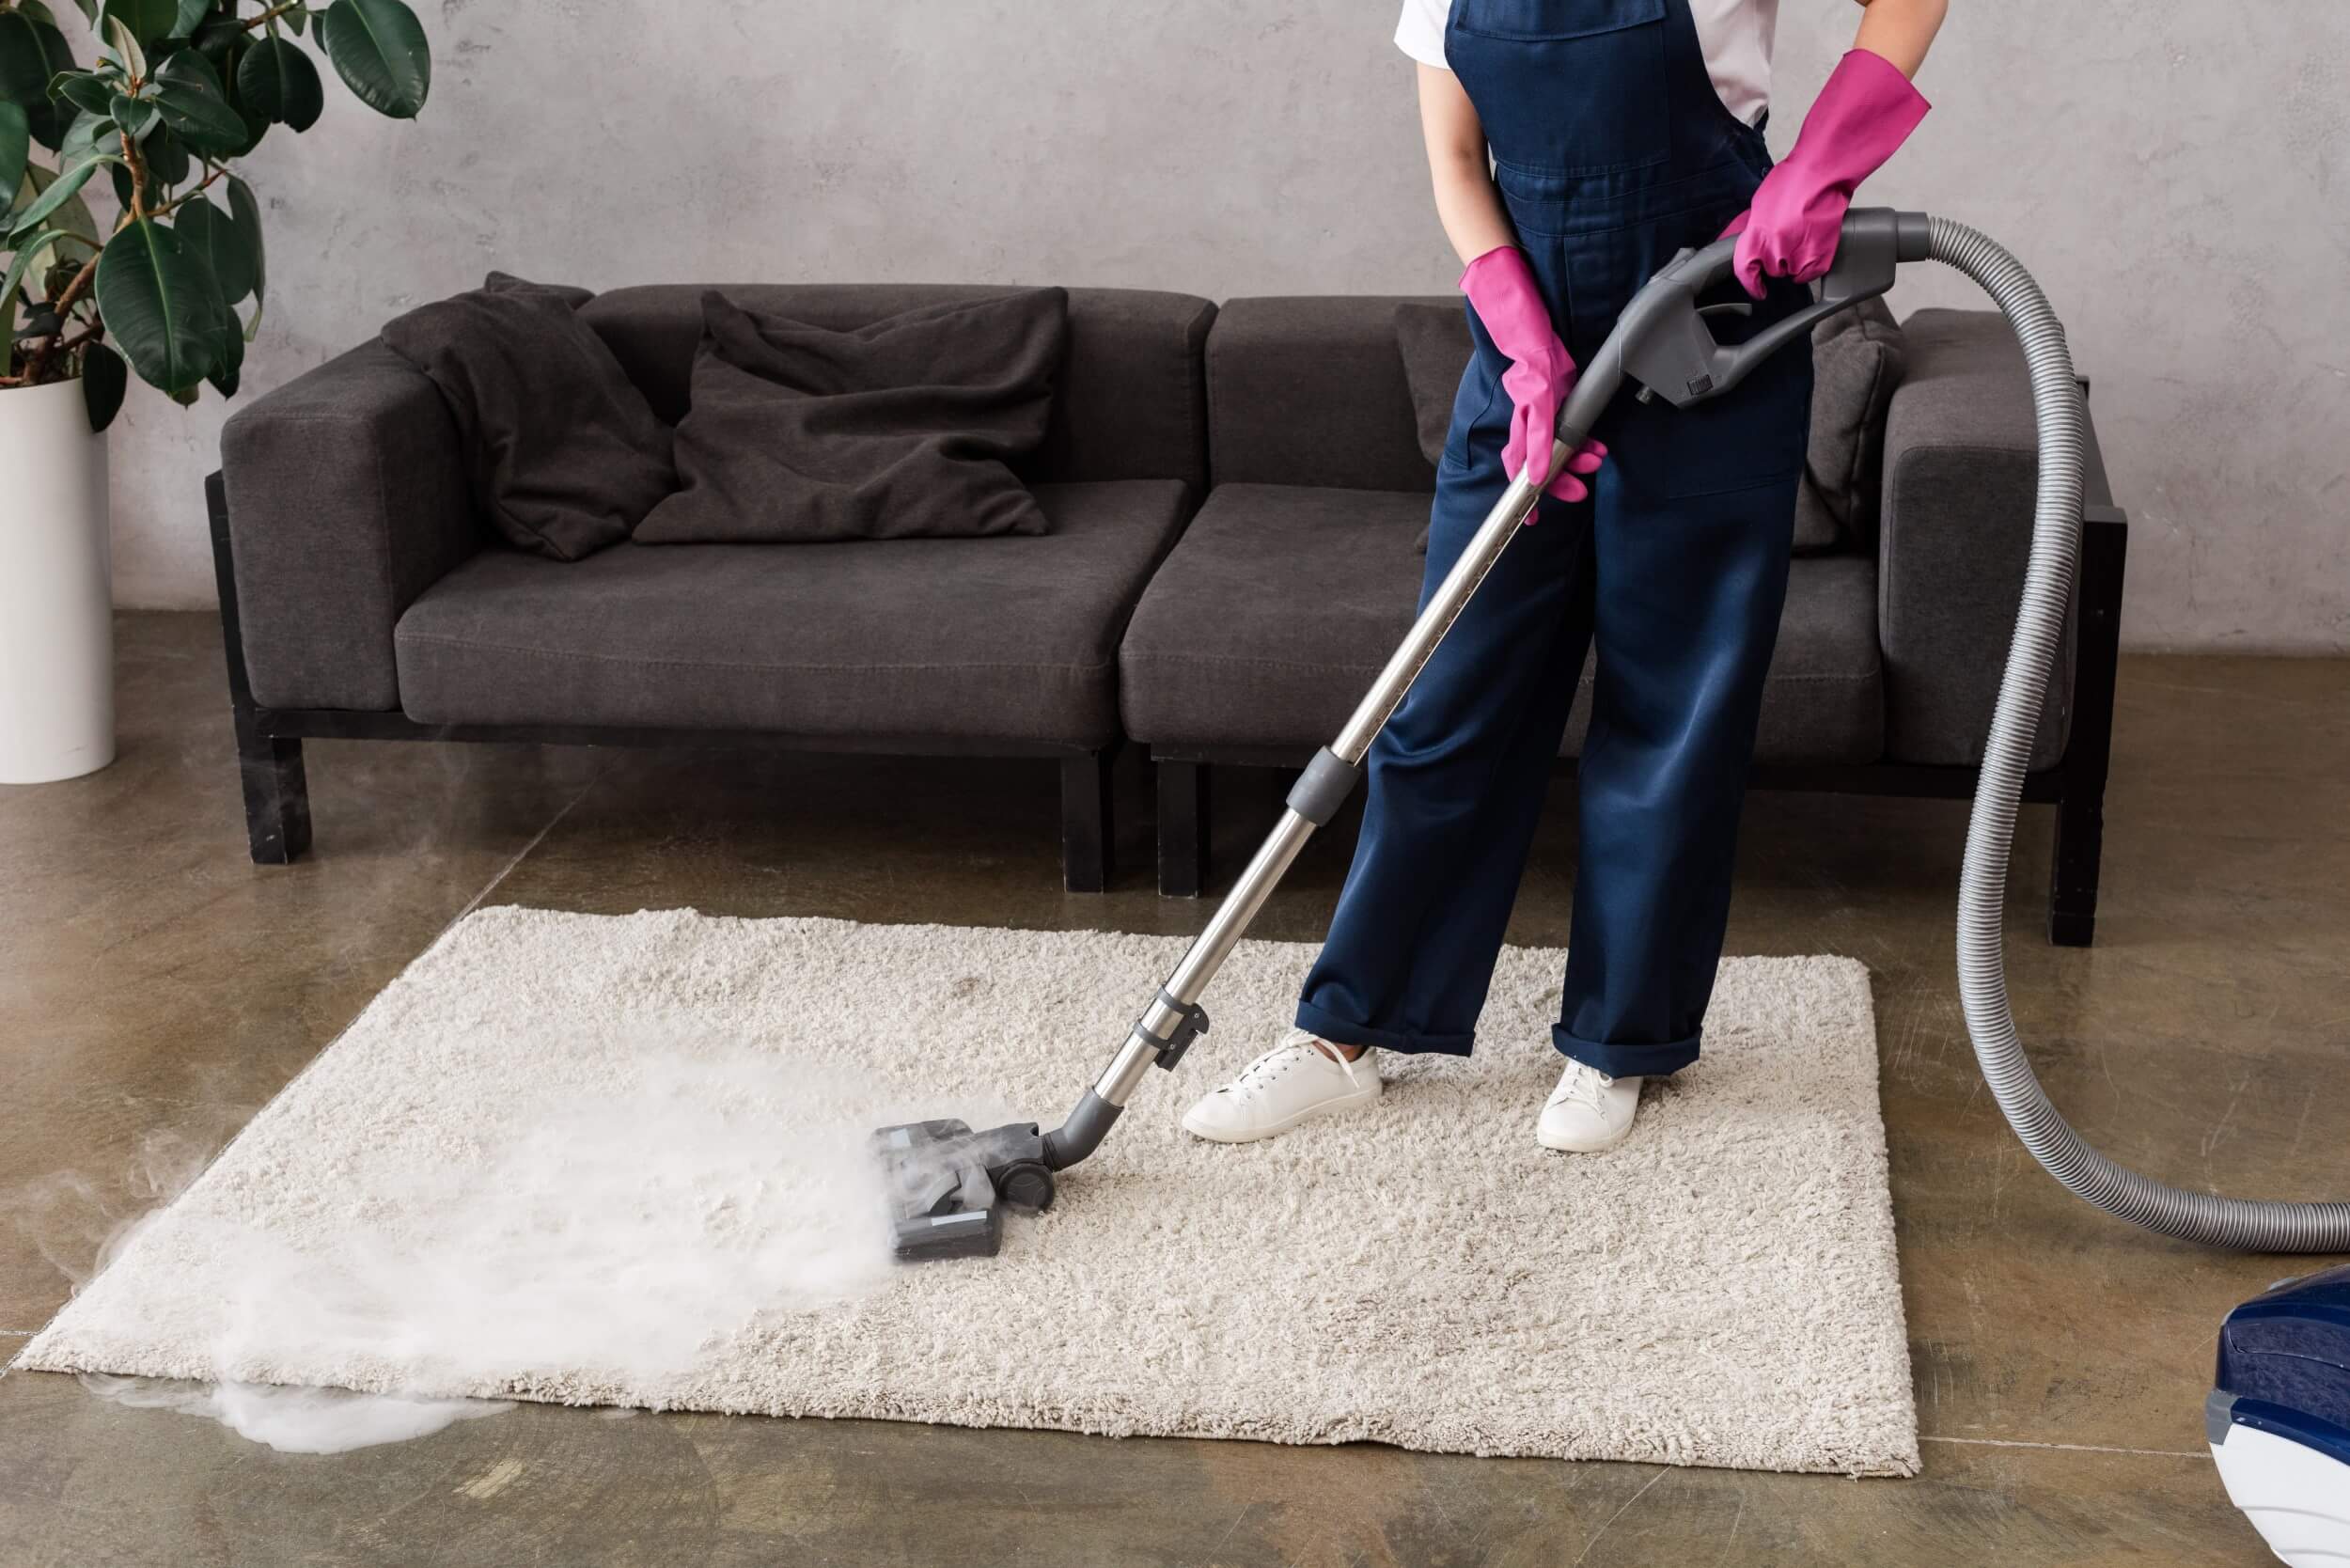 No.1 Best Express Services of Carpet Cleaning in Allen TX